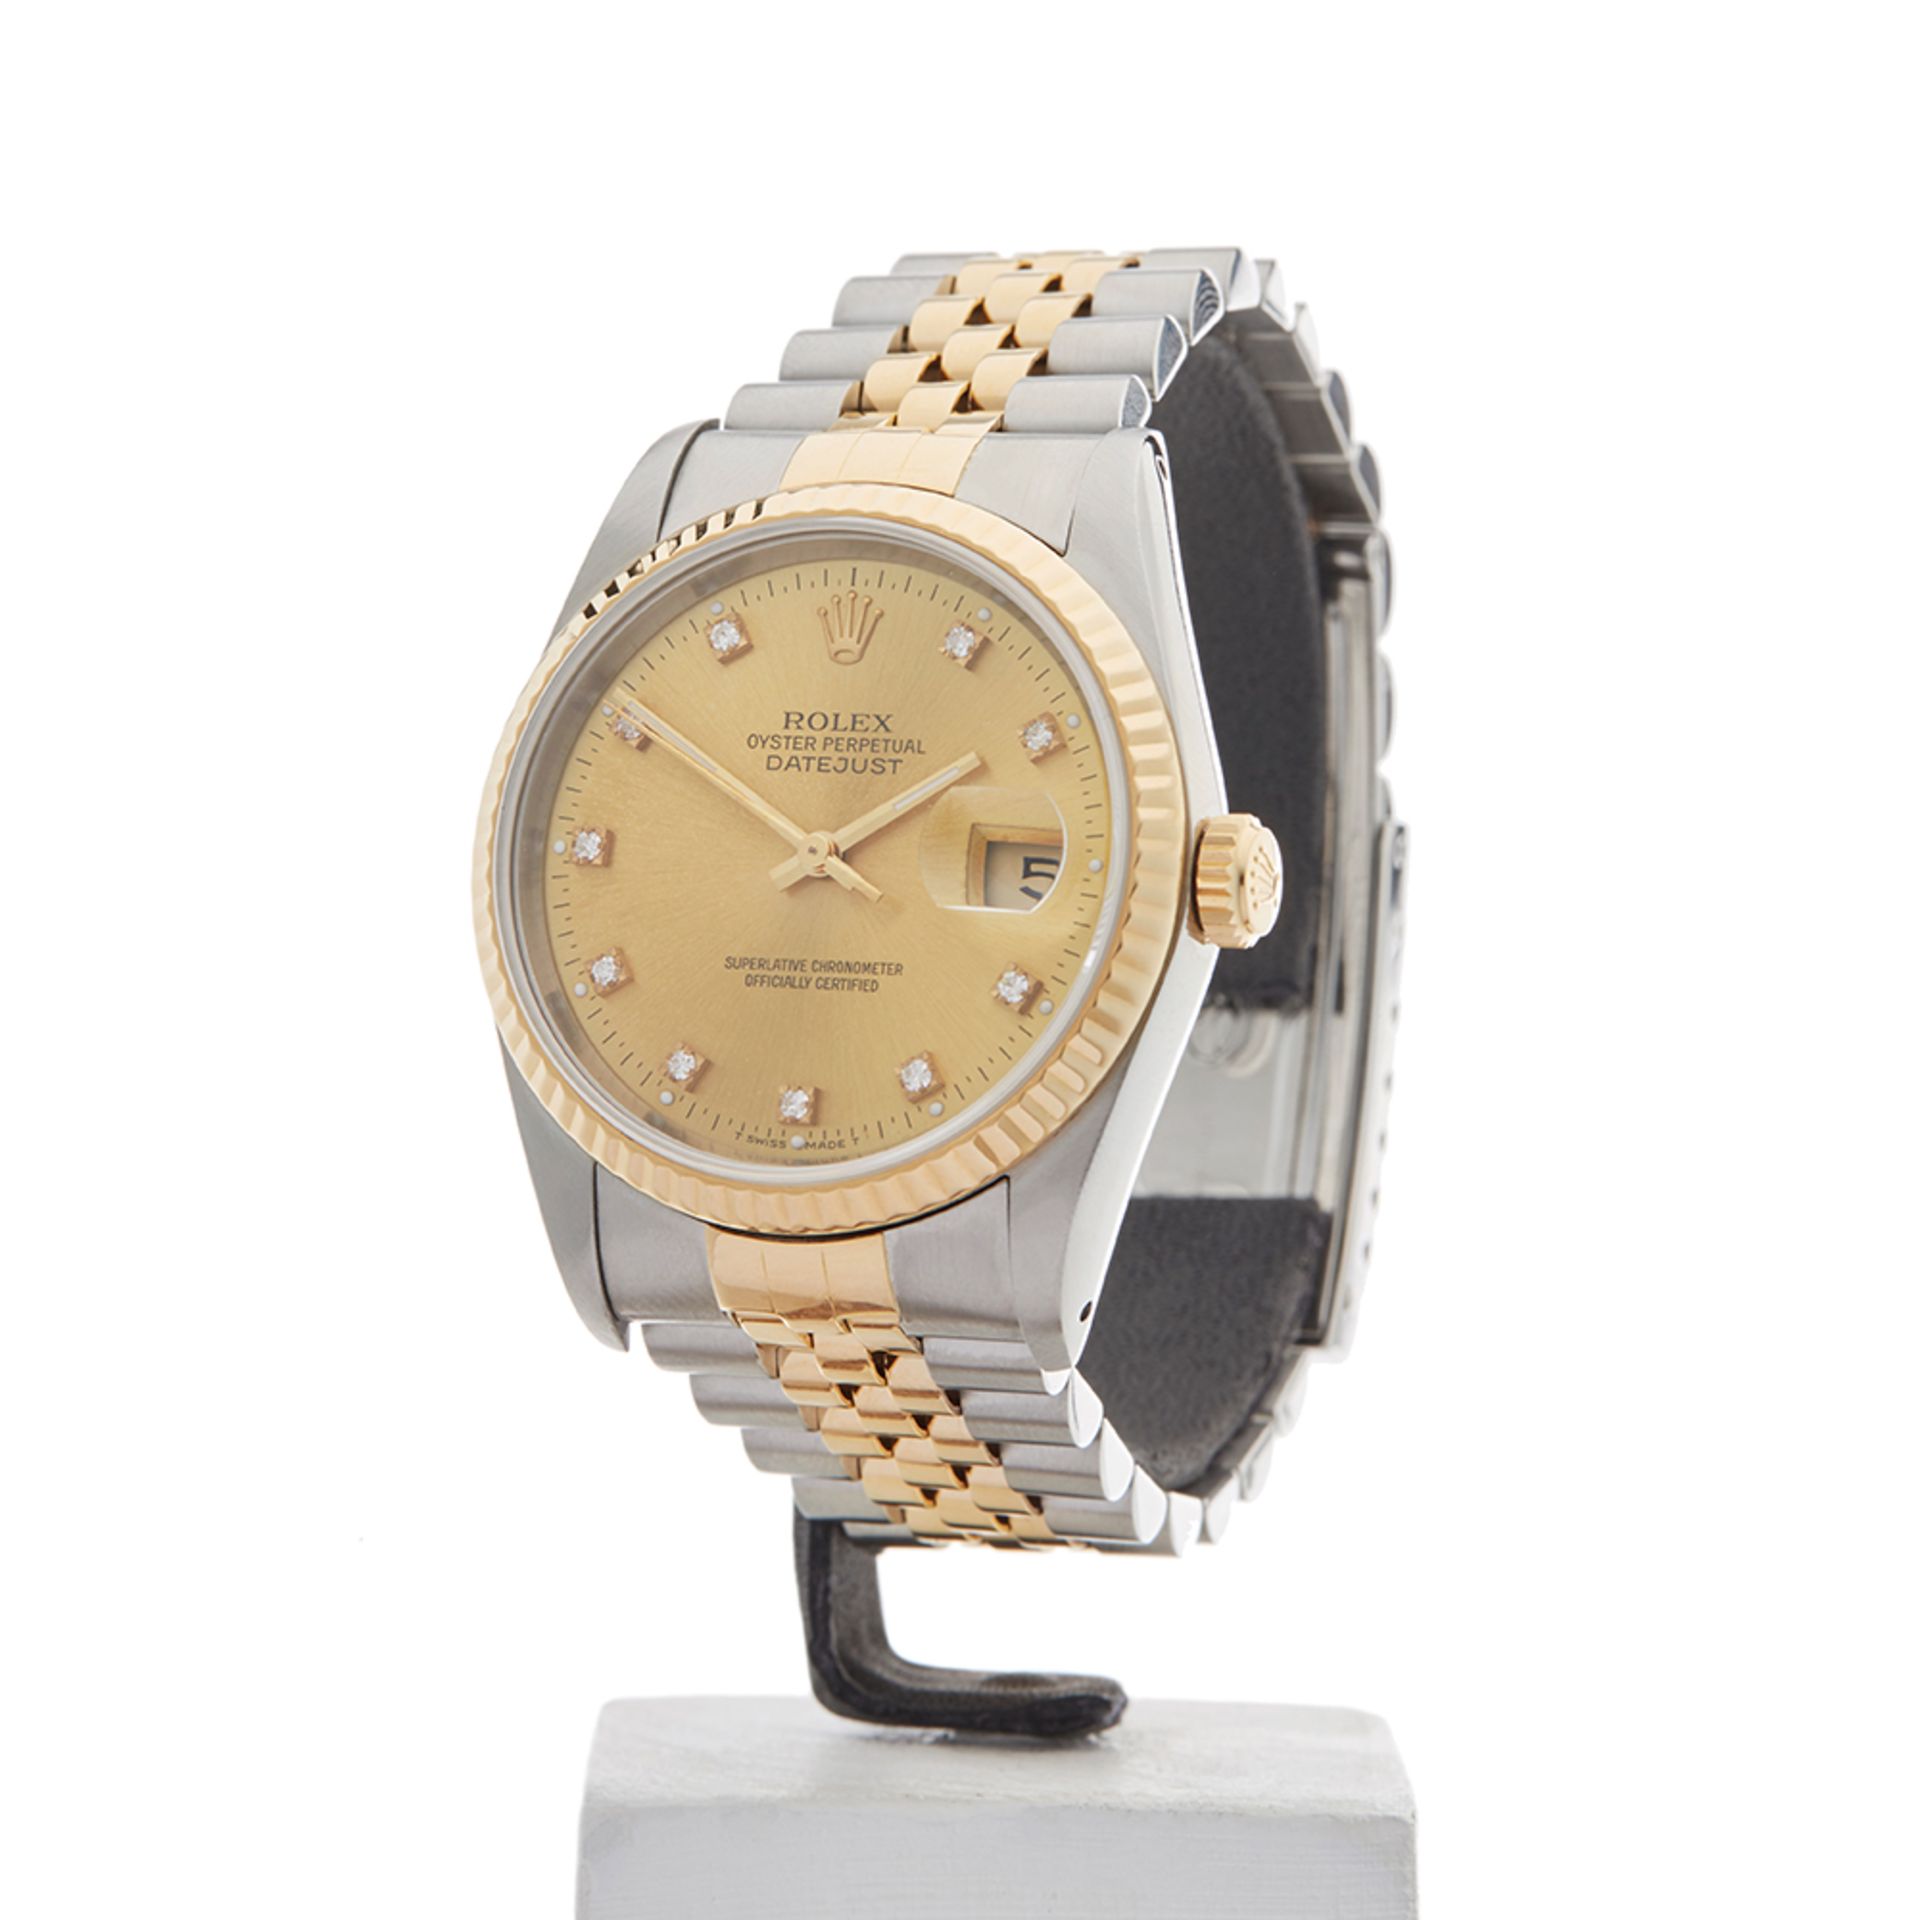 Datejust 36mm Stainless Steel & 18k Yellow Gold - 16233